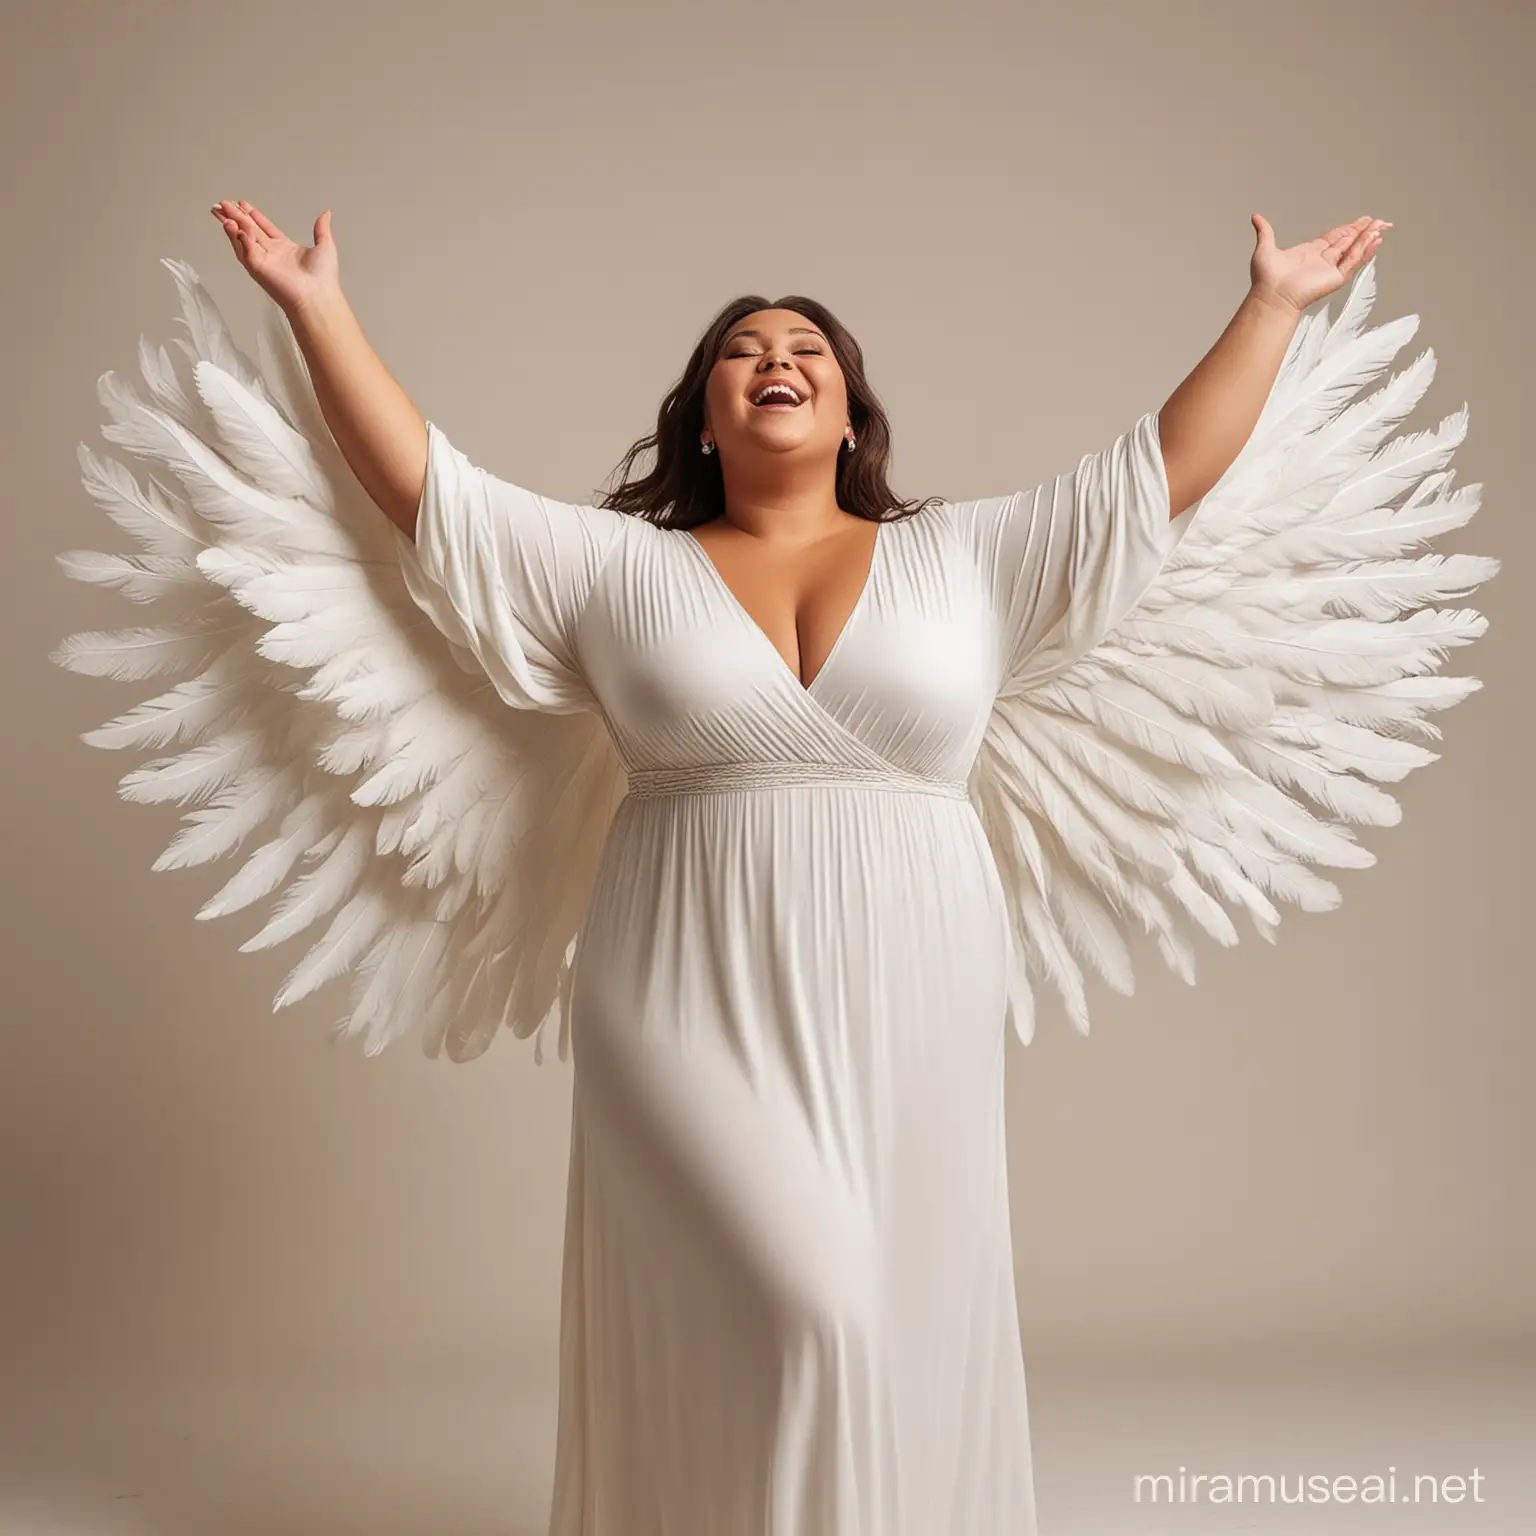 Plus size woman, arms extended, feather long dress